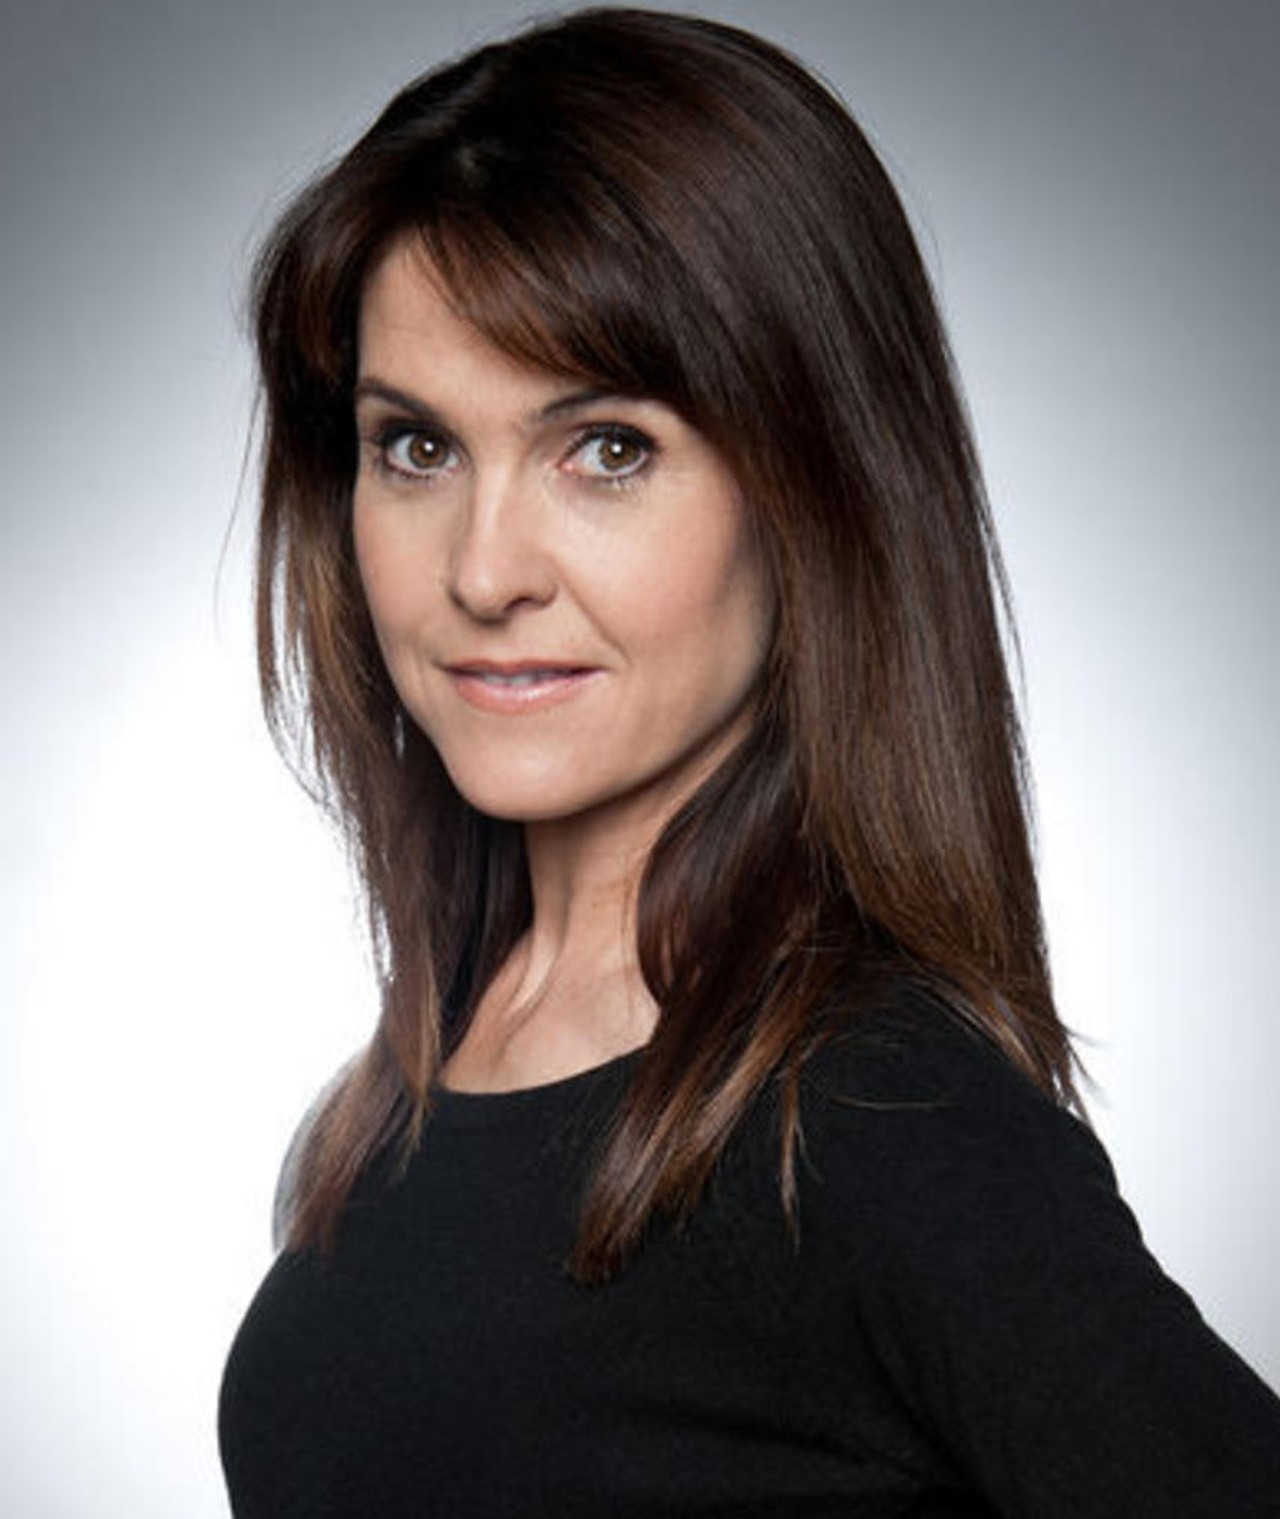 Gillian kearney movies and tv shows